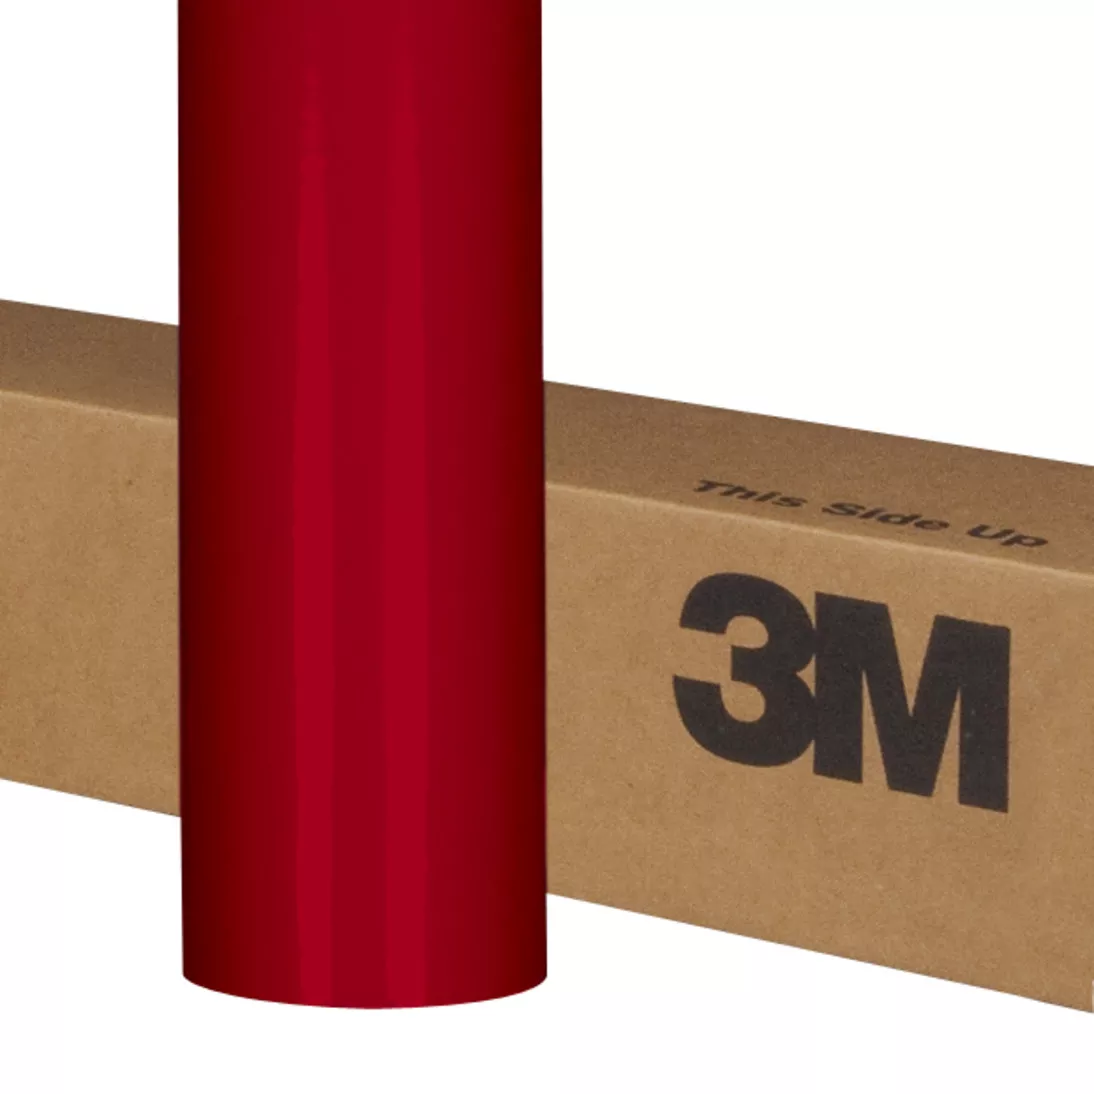 3M™ Scotchcal™ ElectroCut™ Graphic Film 7125-23, Deep Red, 48 in x 50 yd